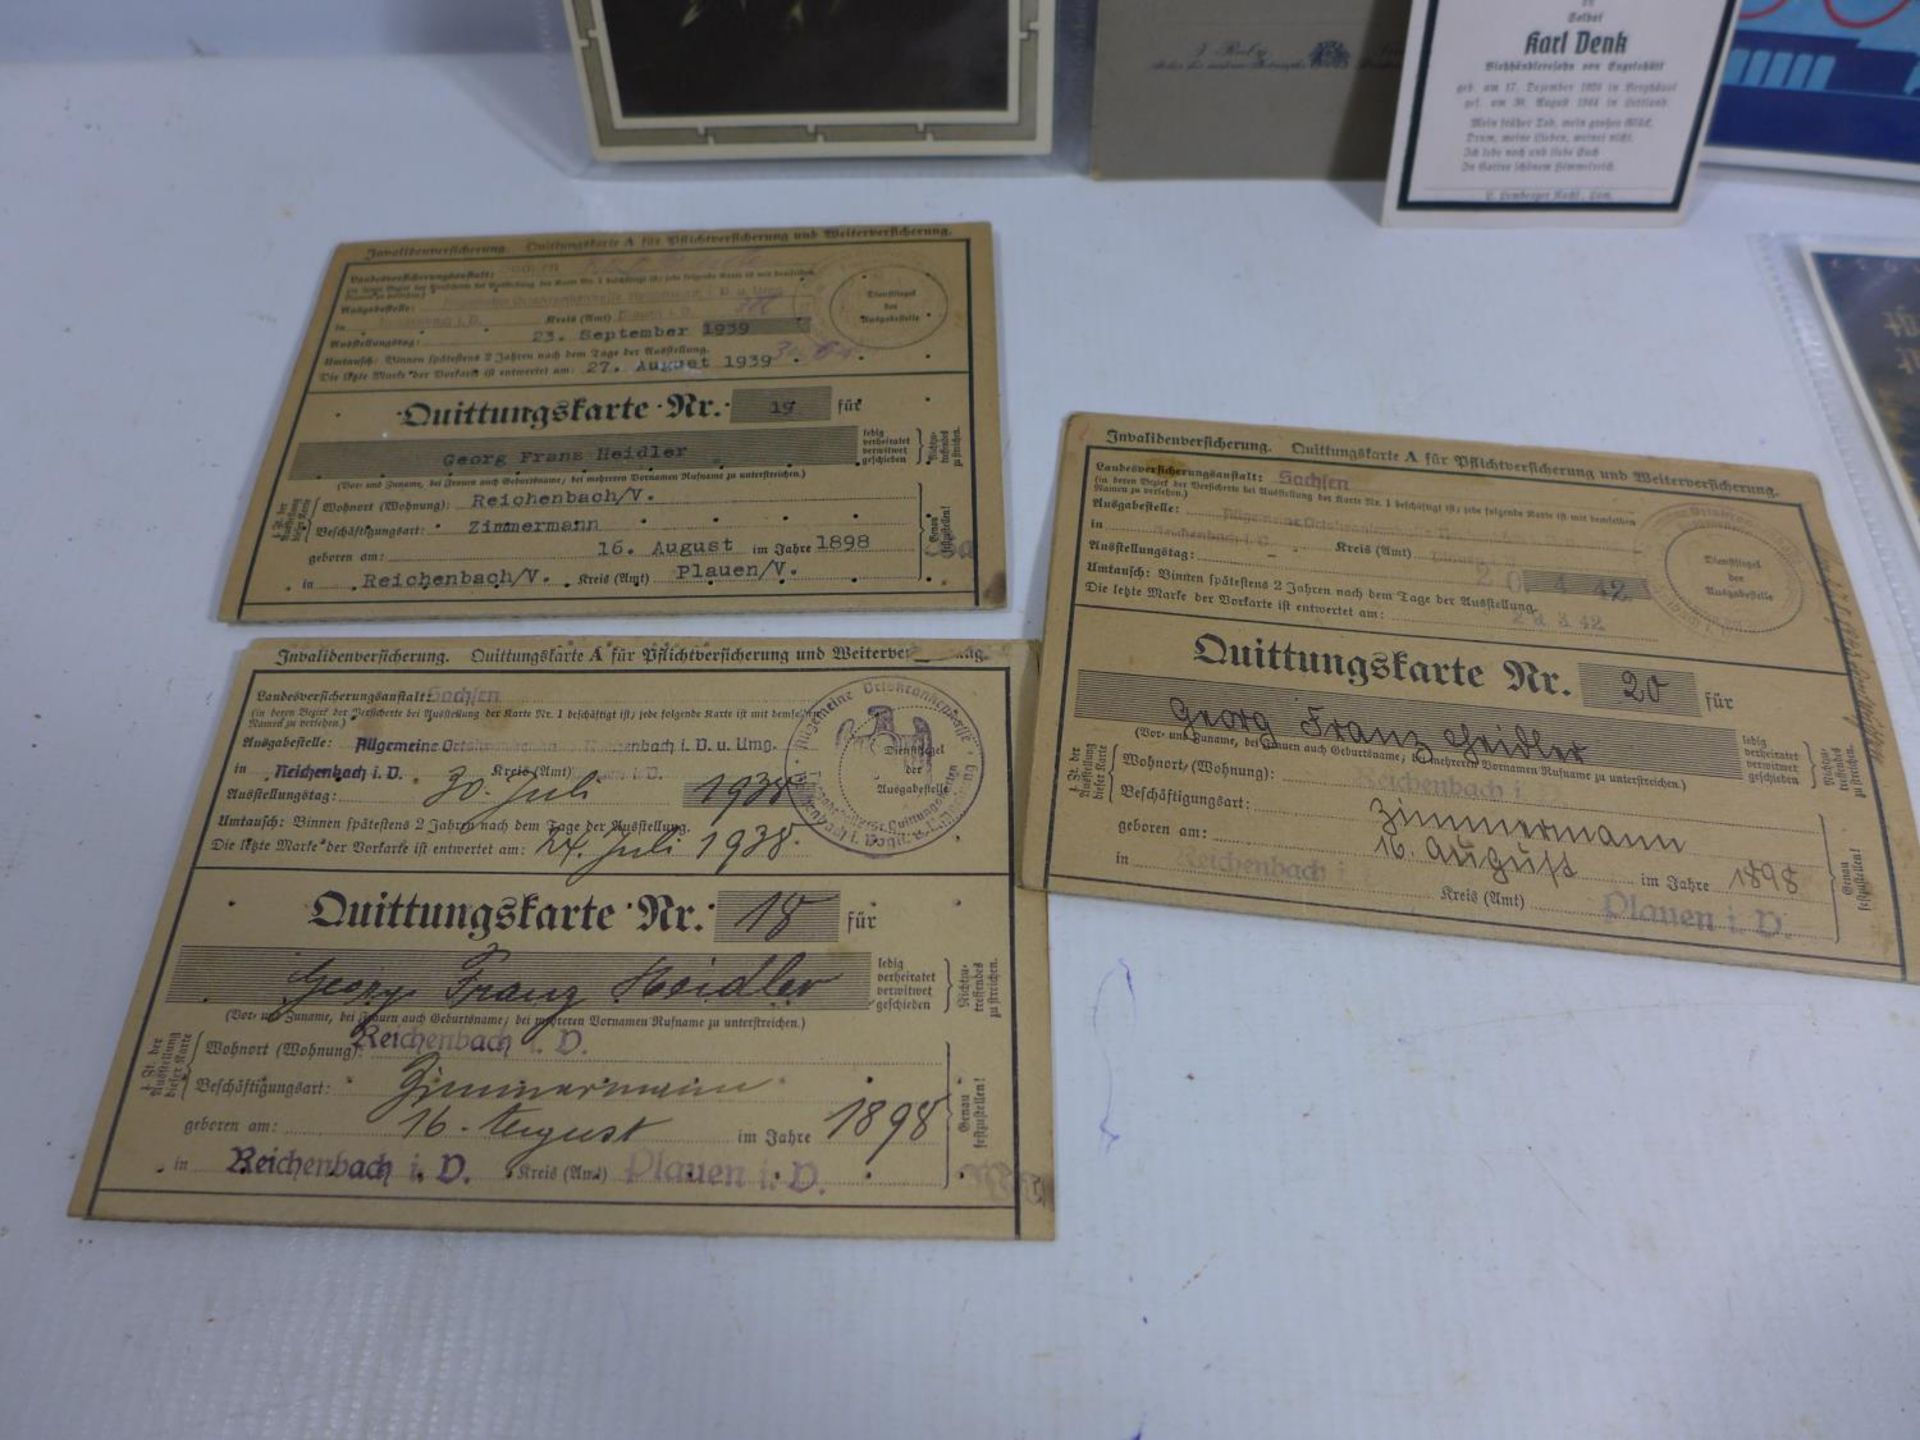 A COLLECTION OF NAZI GERMANY EPHEMERA TO INCLUDE PHOTOGRAPHS, INVALIDENVERS CARDS ETC - Image 3 of 4